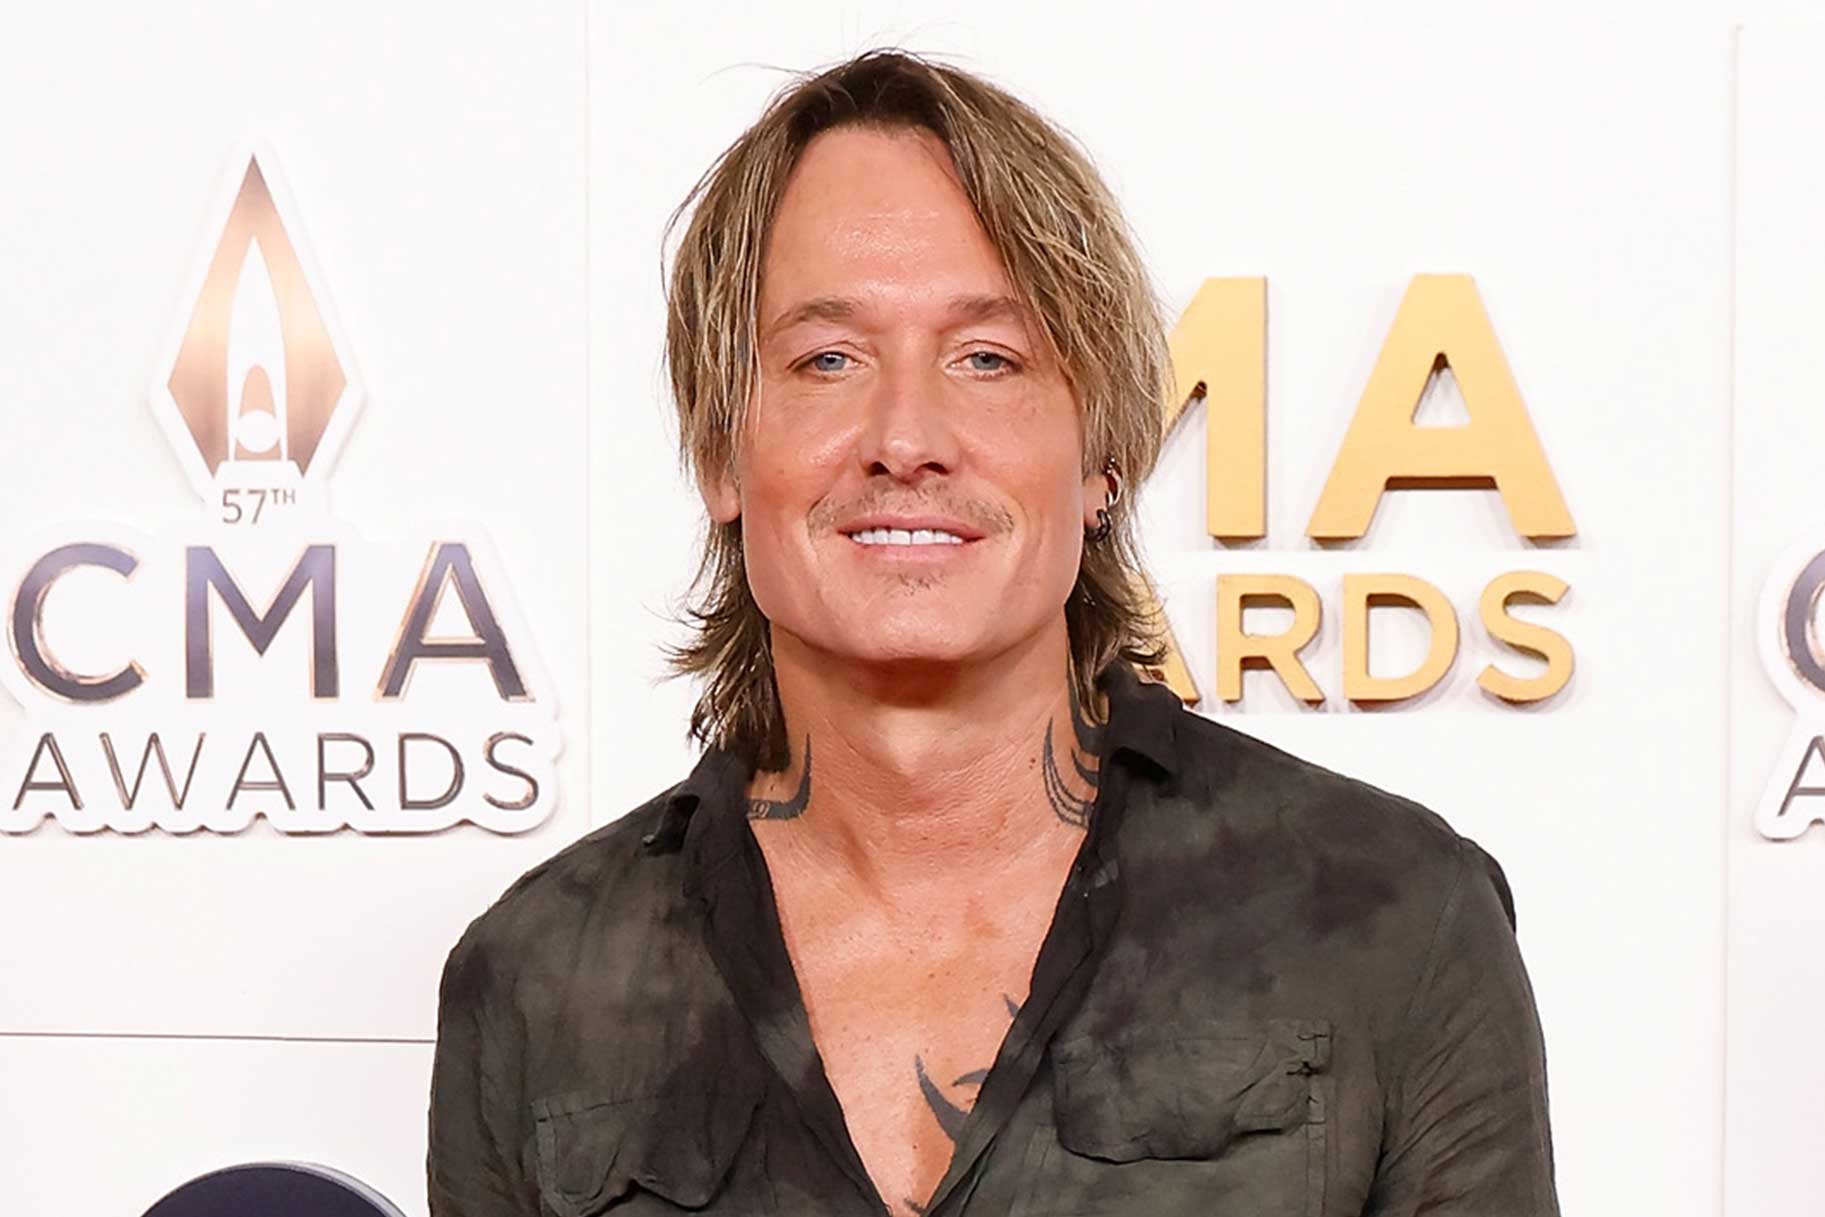 Keith Urban's Soulful, A Capella Version of The National Anthem Will Mesmerize You